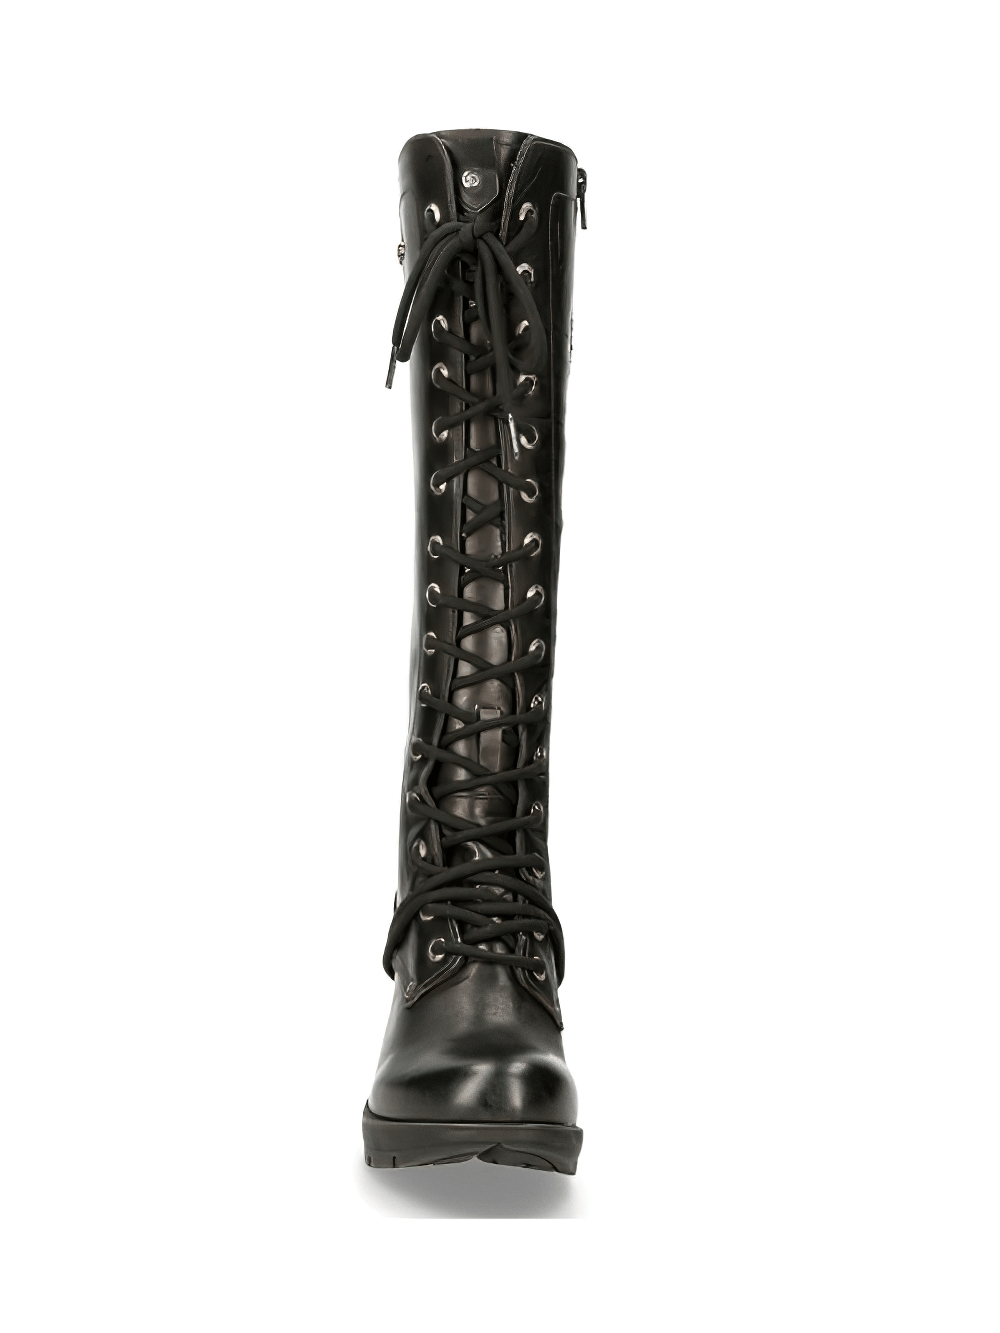 NEW ROCK Laced Leather Boots with Metallic Heels